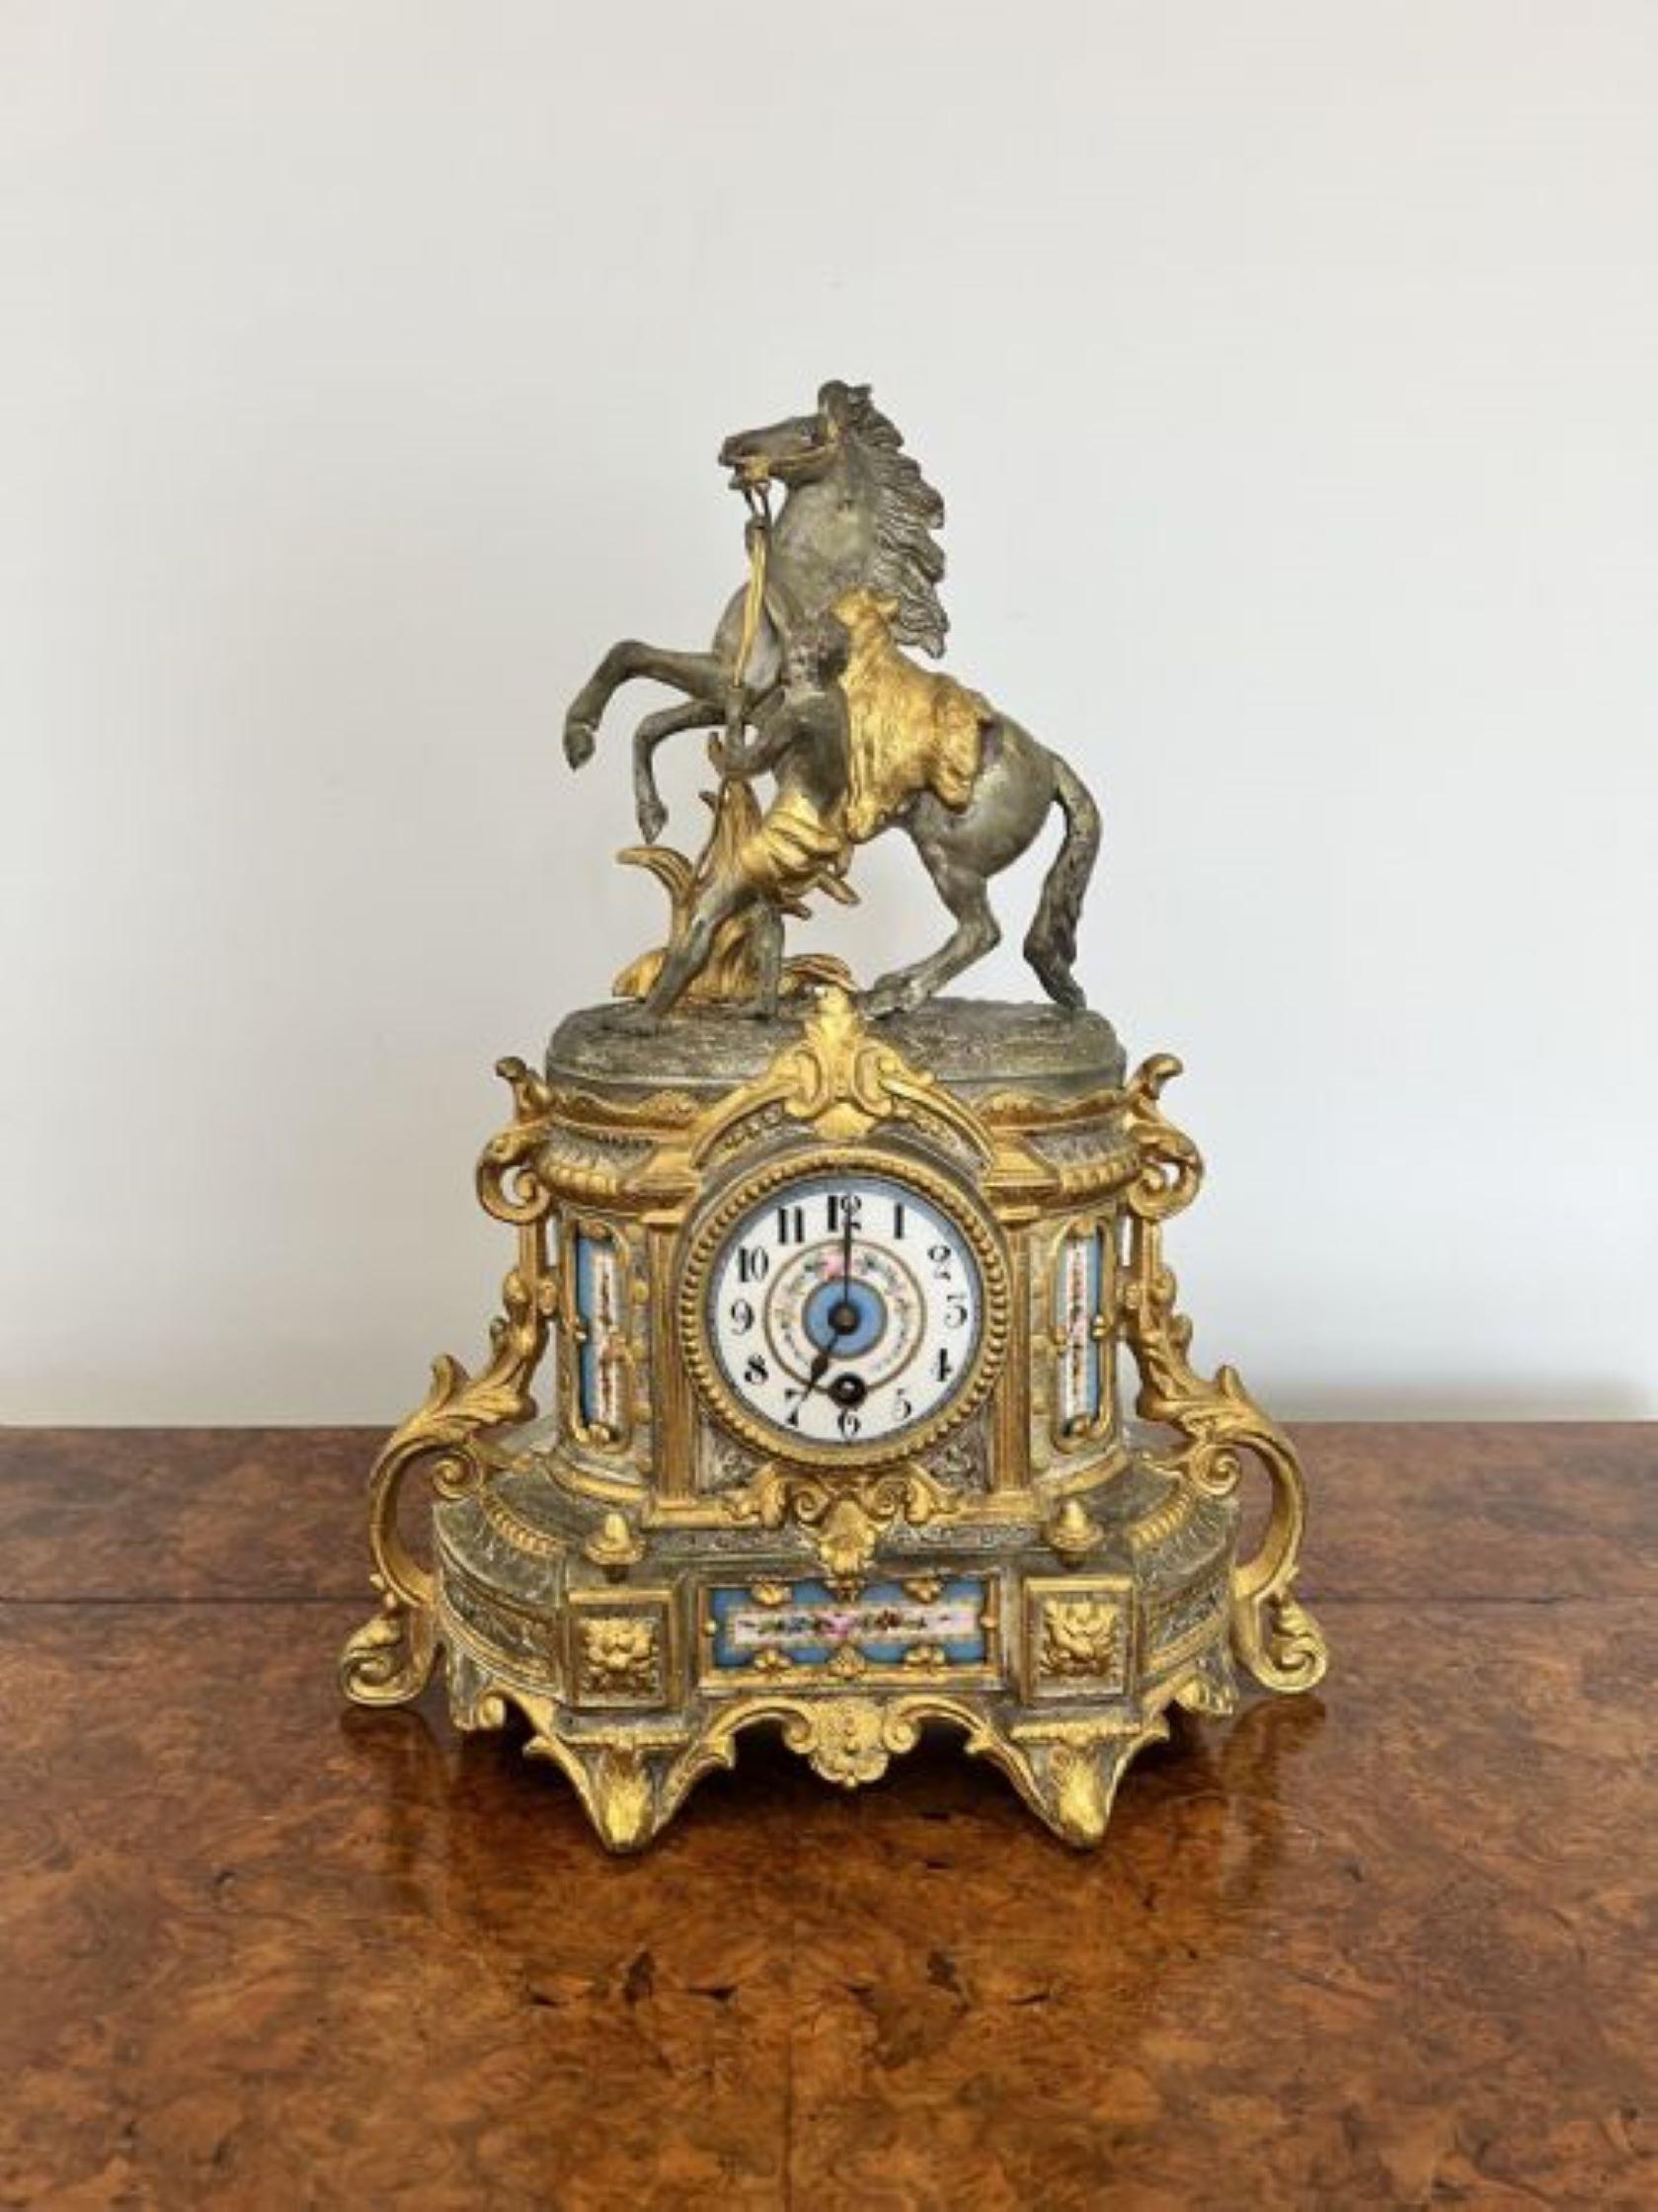 Quality antique Victorian gilded timepiece with beautiful porcelain detail having a quality antique Victorian timepiece with wonderful ornate decoration throughout with a horse and rider mounted to the top, having porcelain decorated panels to both